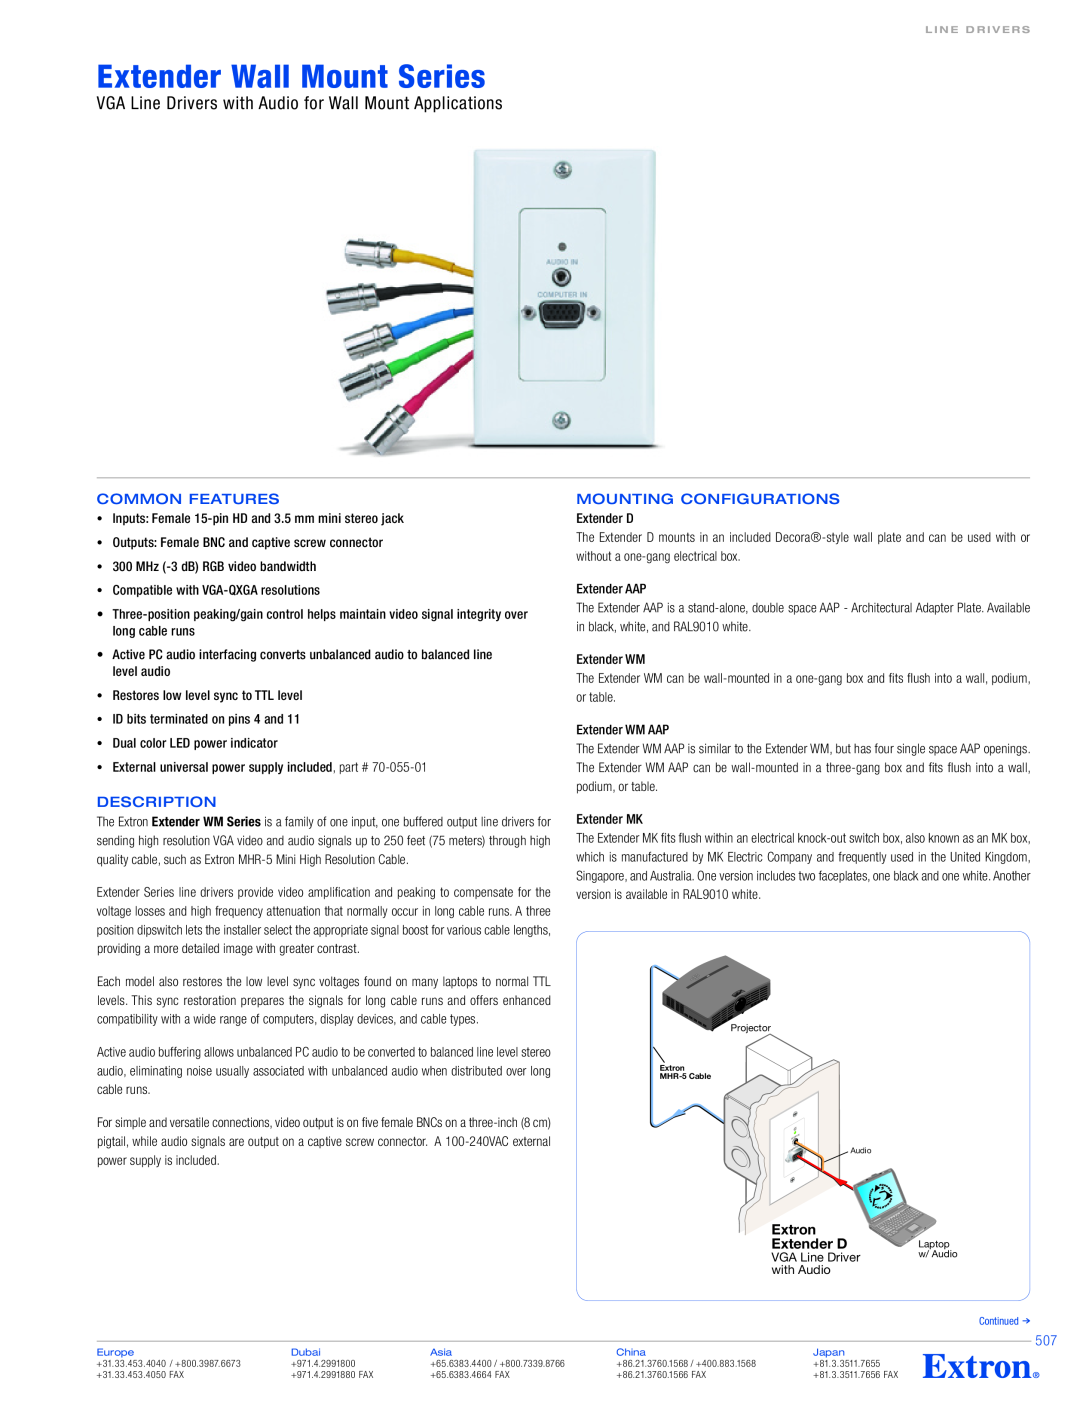 Extron electronic Extender Wall Mount Series specifications VGA Line Drivers with Audio for Wall Mount Applications 